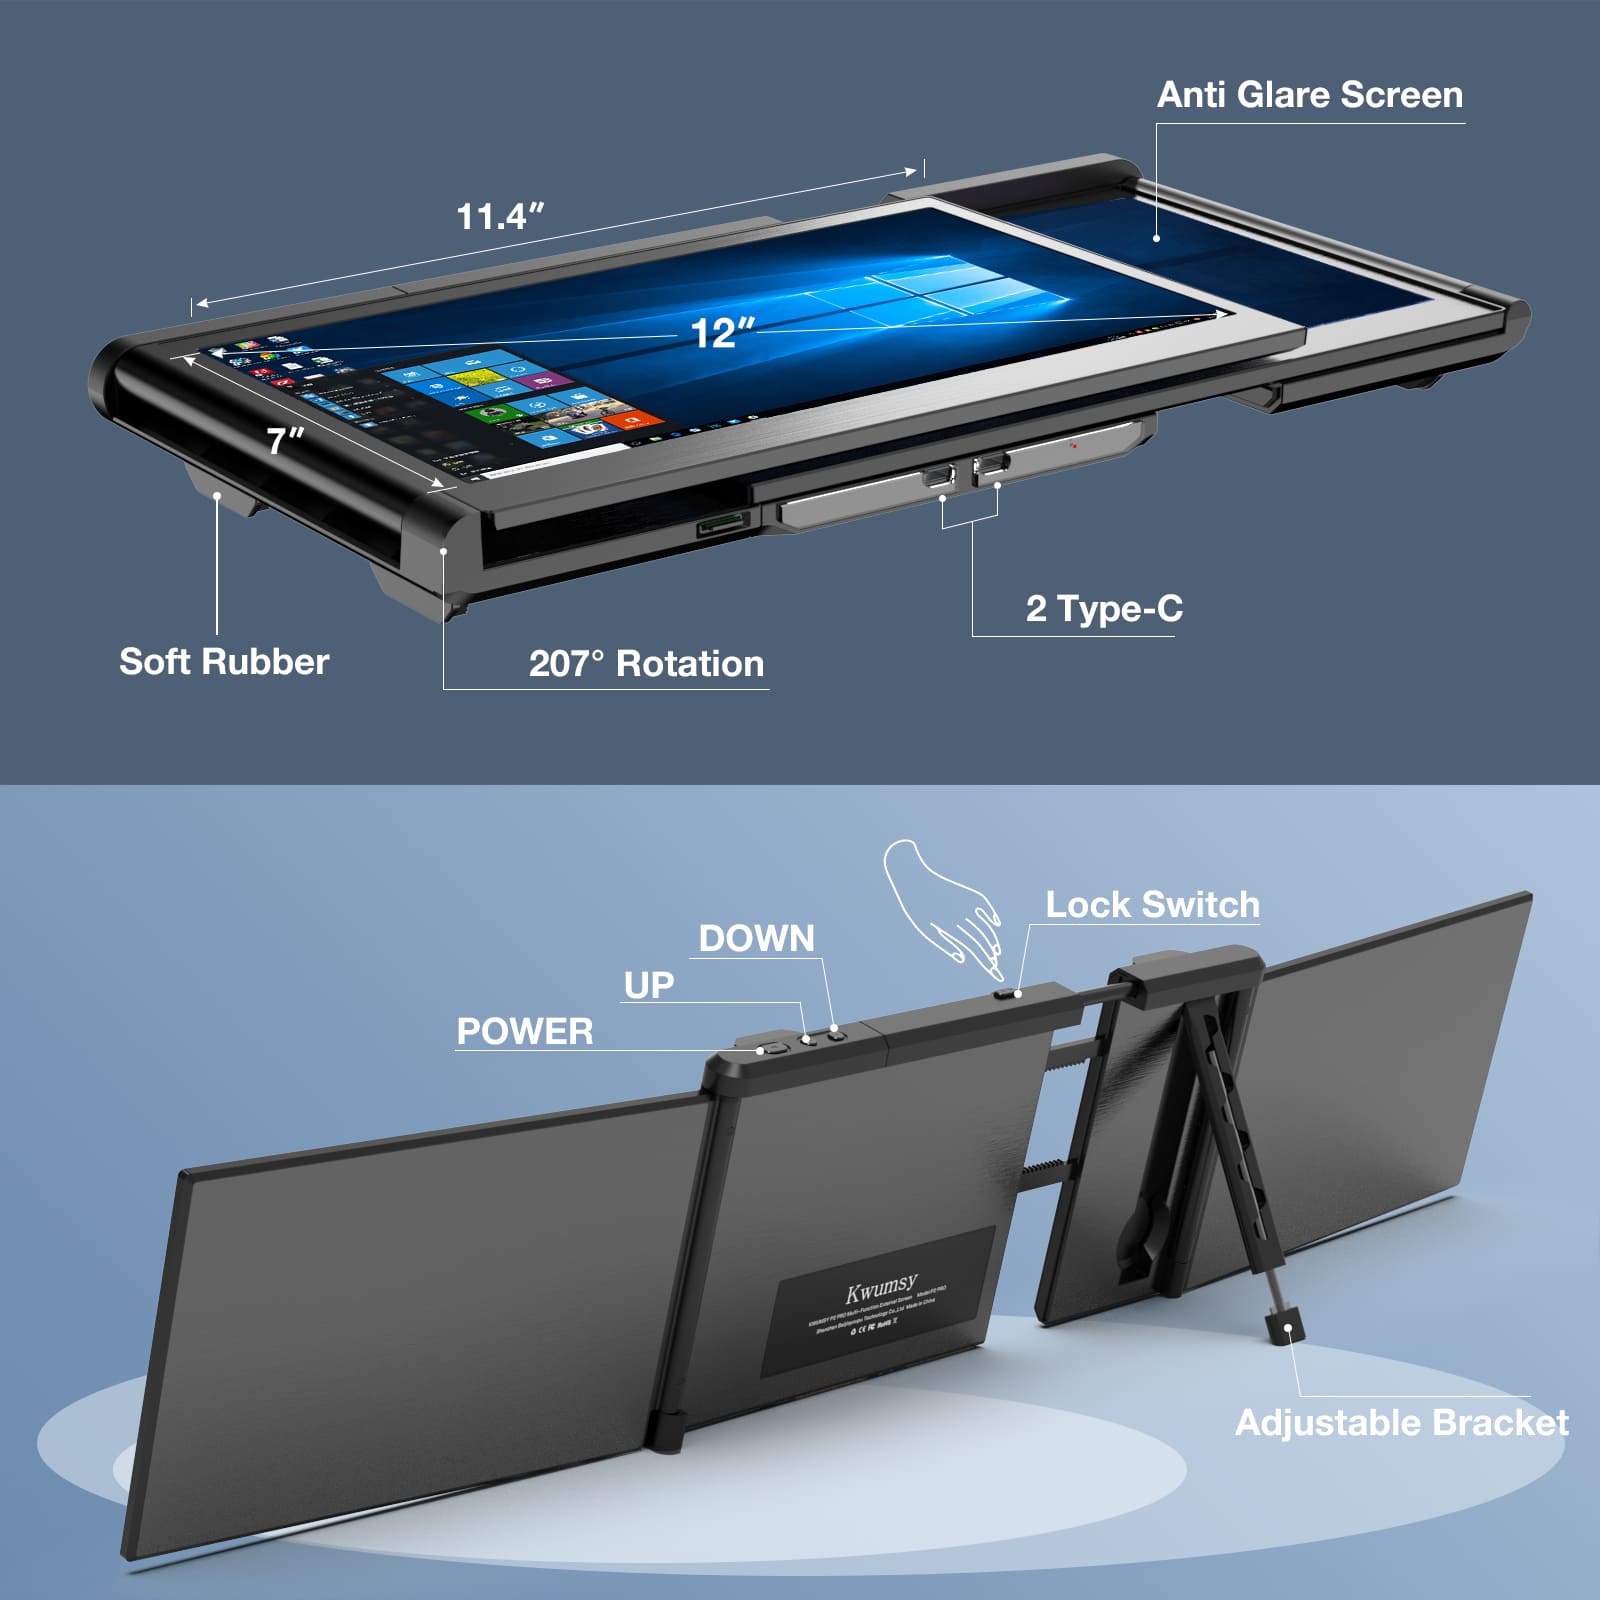 laptop extension monitor – Compra laptop extension monitor con